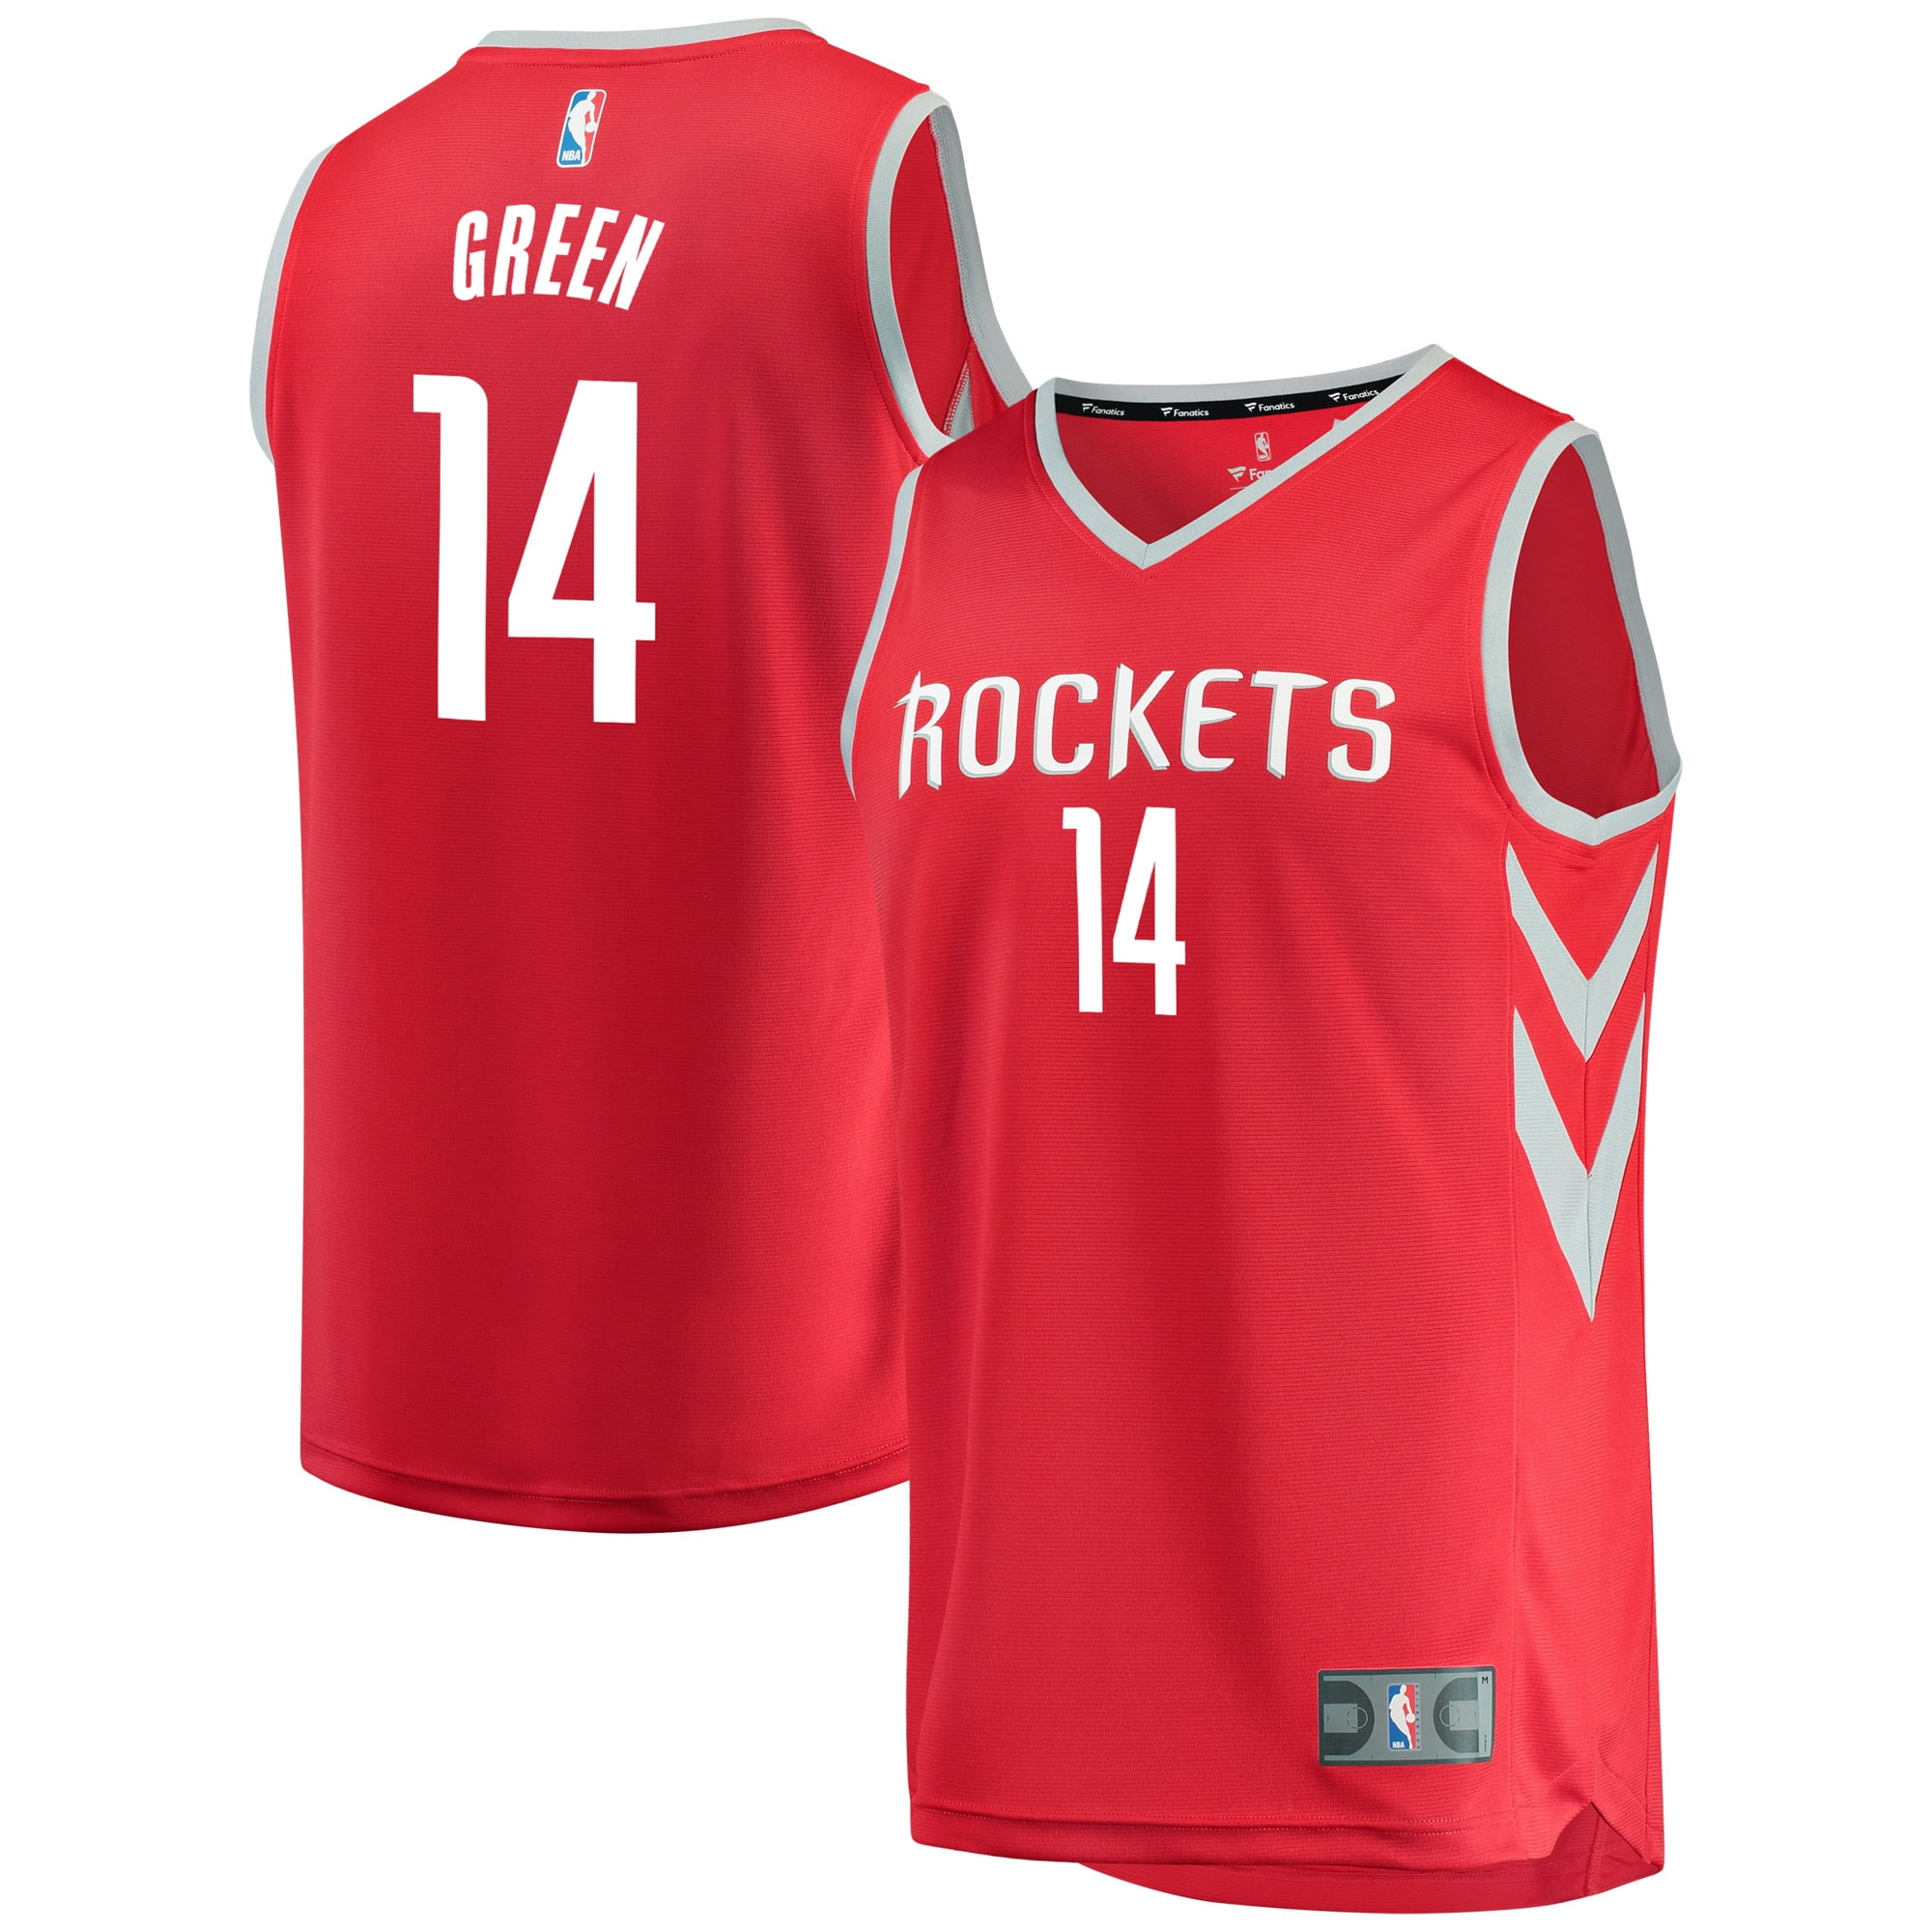 gerald green jersey number